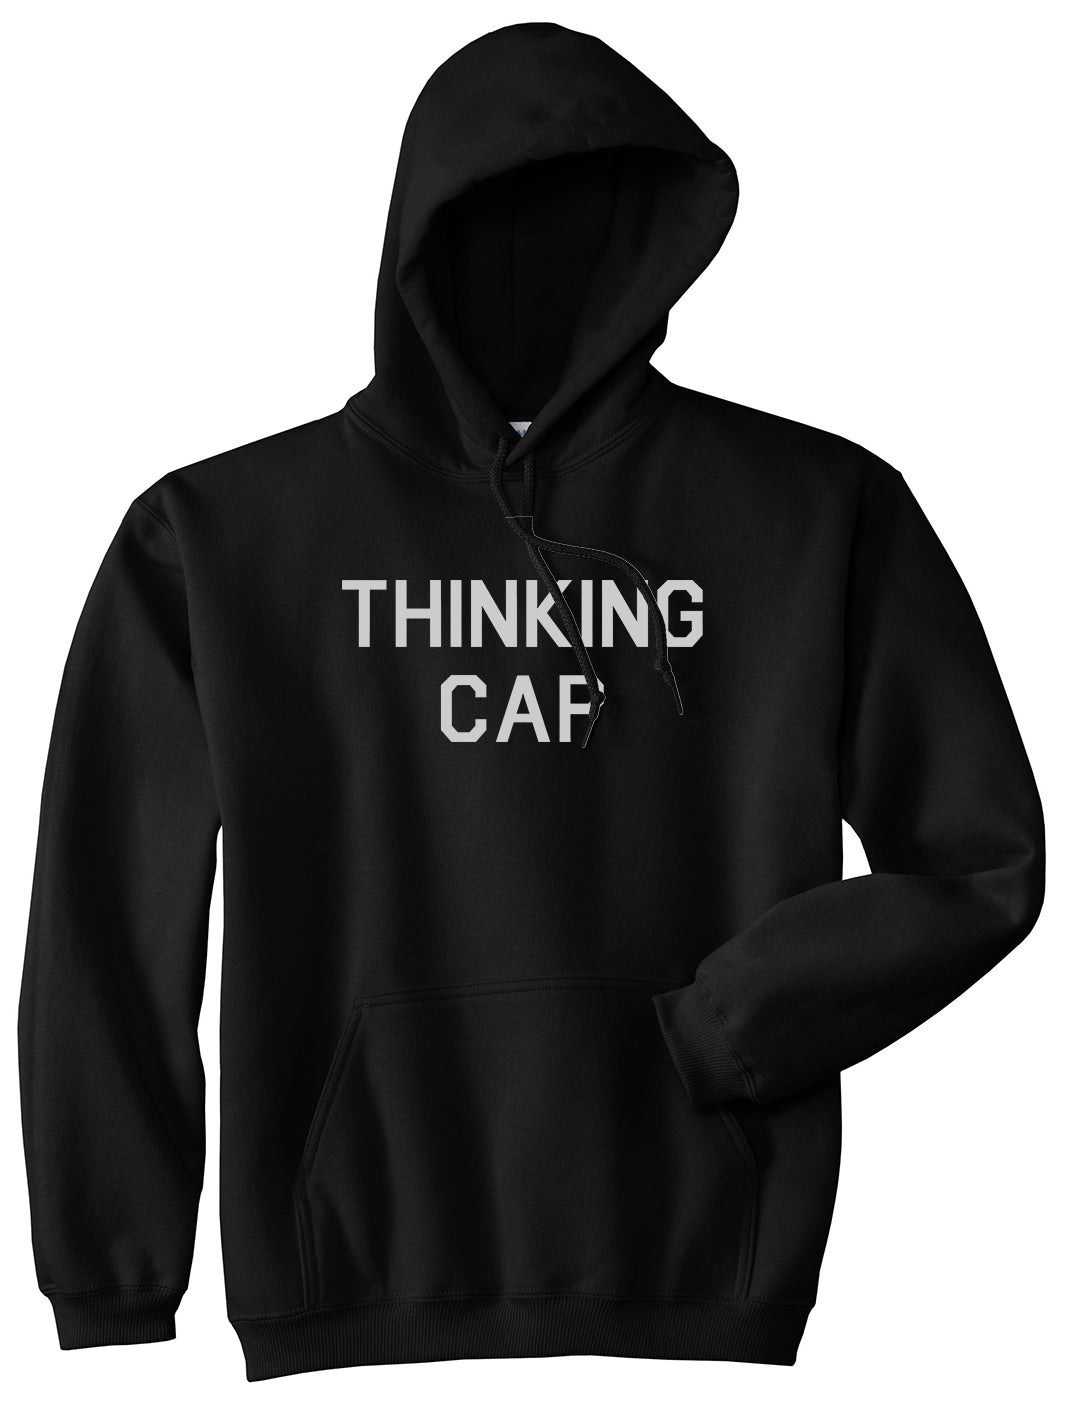 Thinking Cap Funny Nerd Black Pullover Hoodie by Kings Of NY